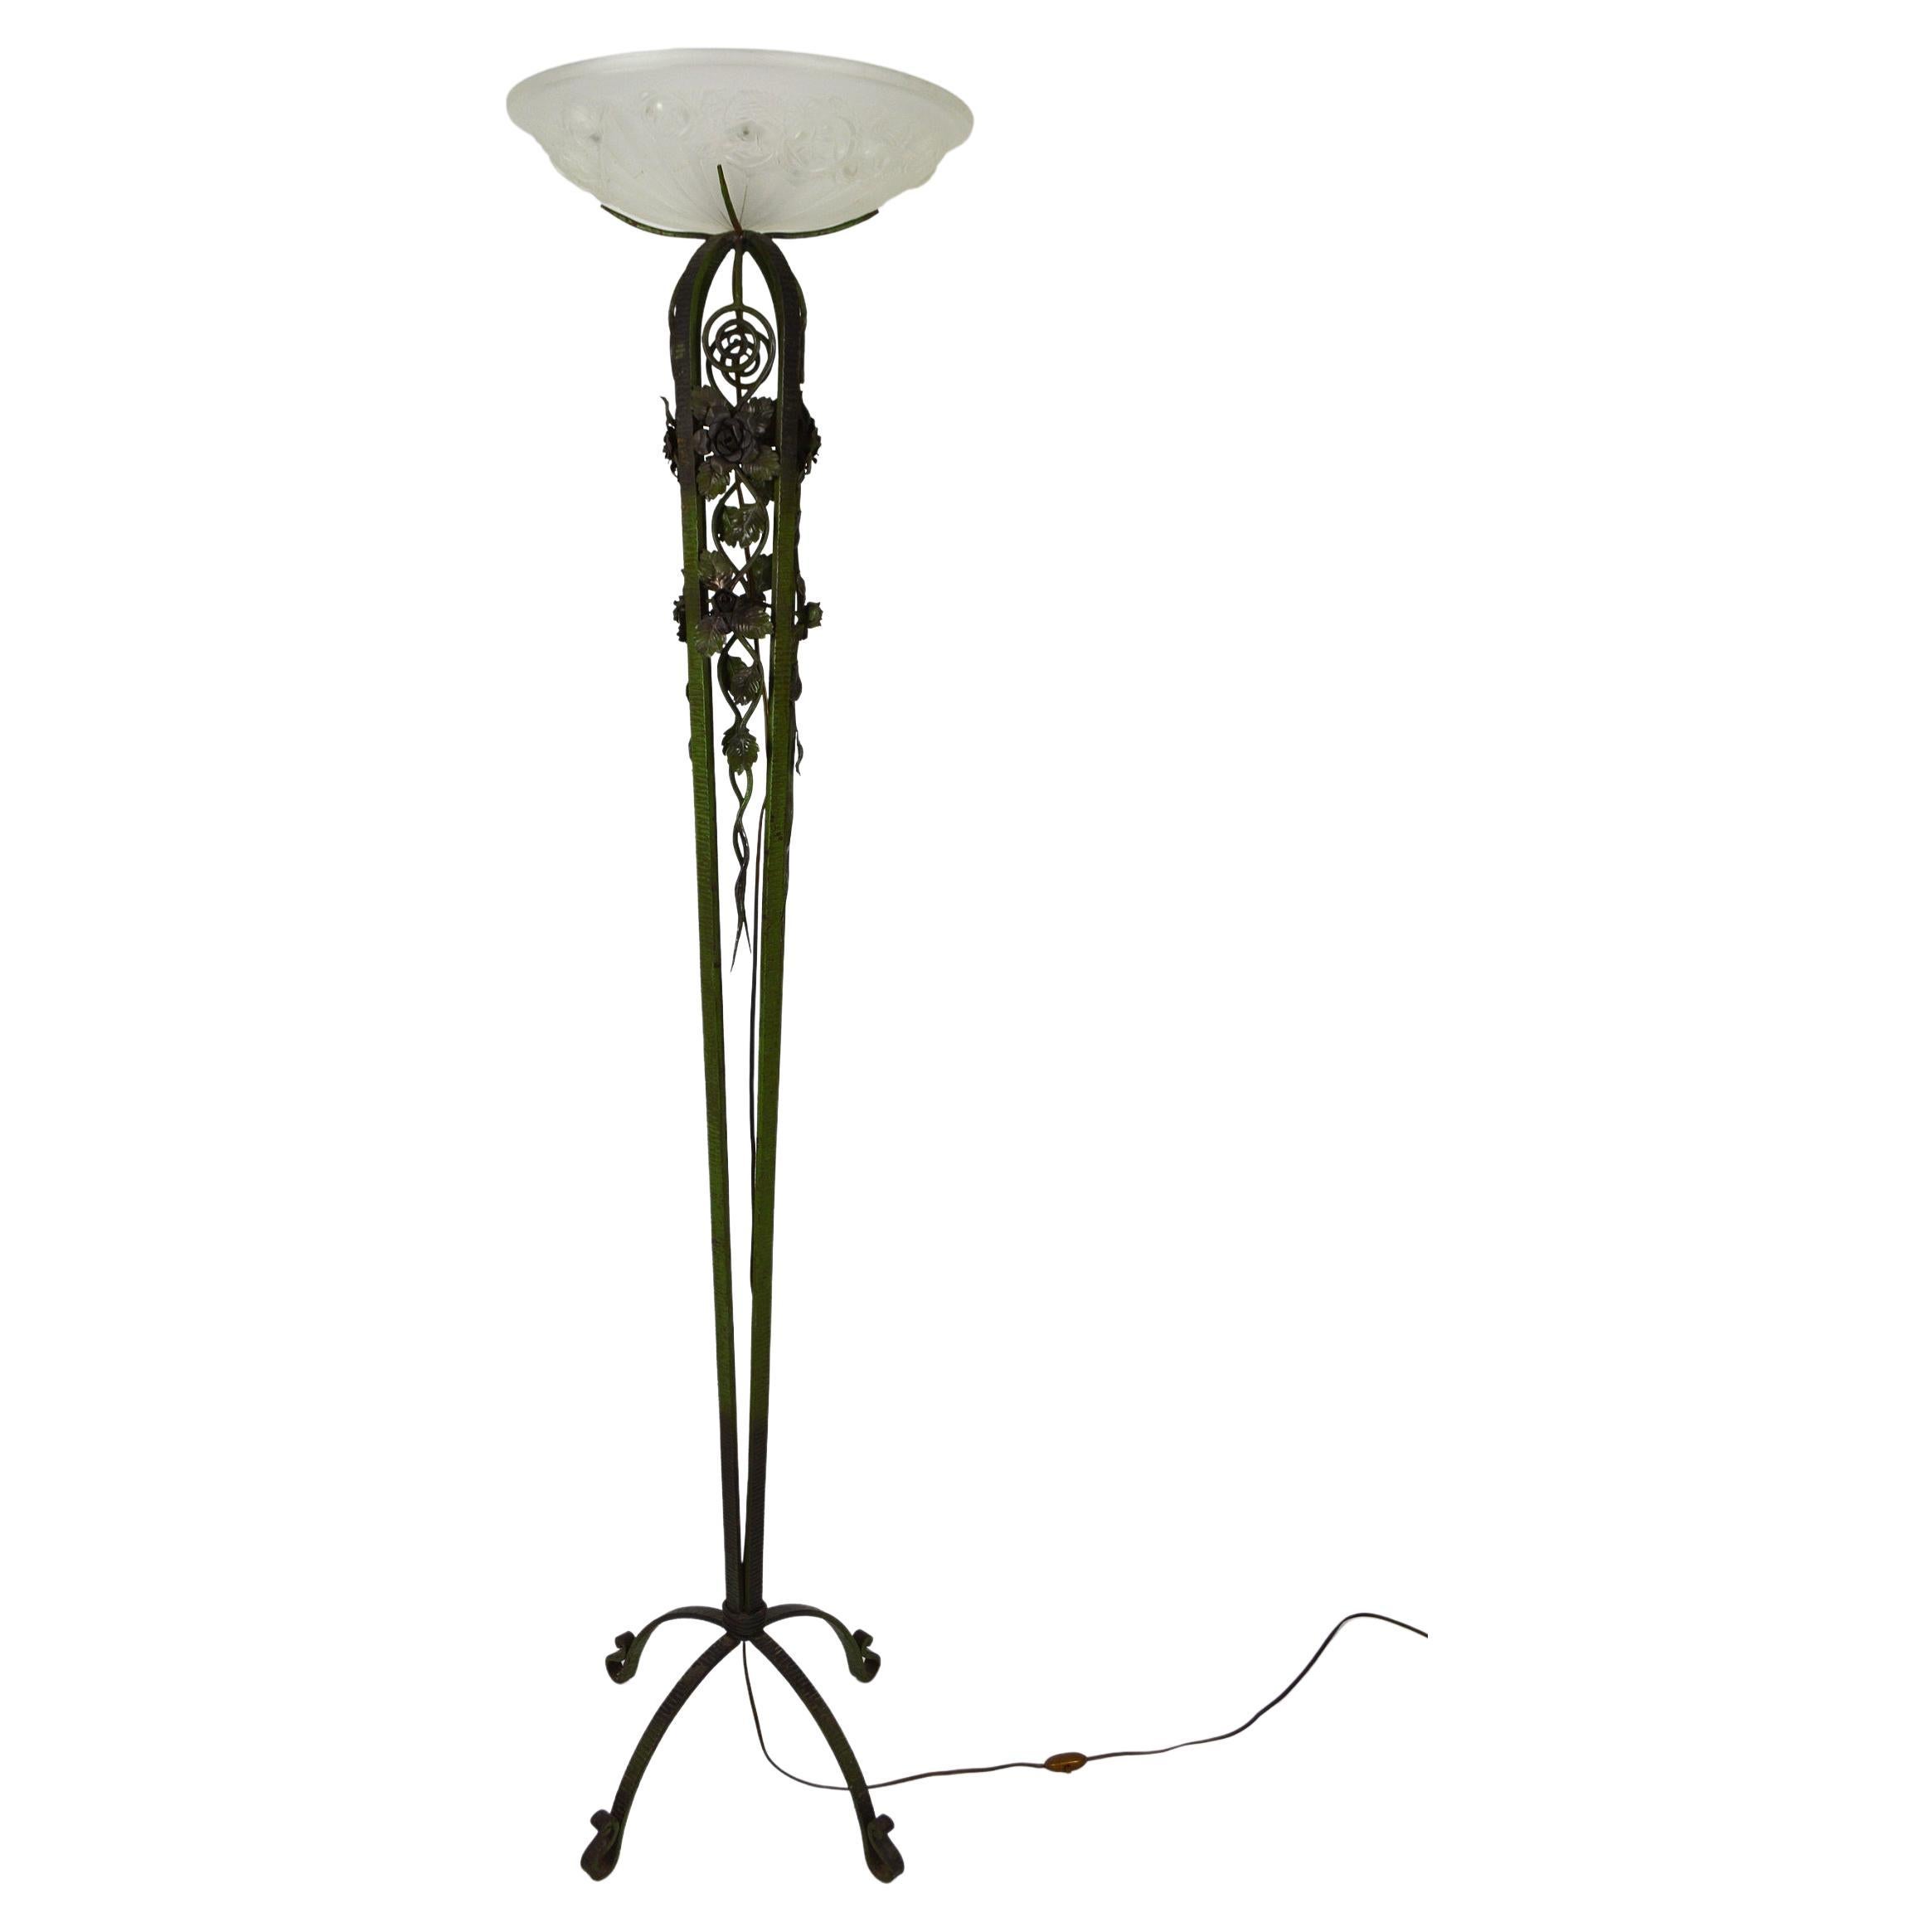 Art Deco Floor Lamp in Wrought Iron and Green Patina, France, circa 1930 For Sale